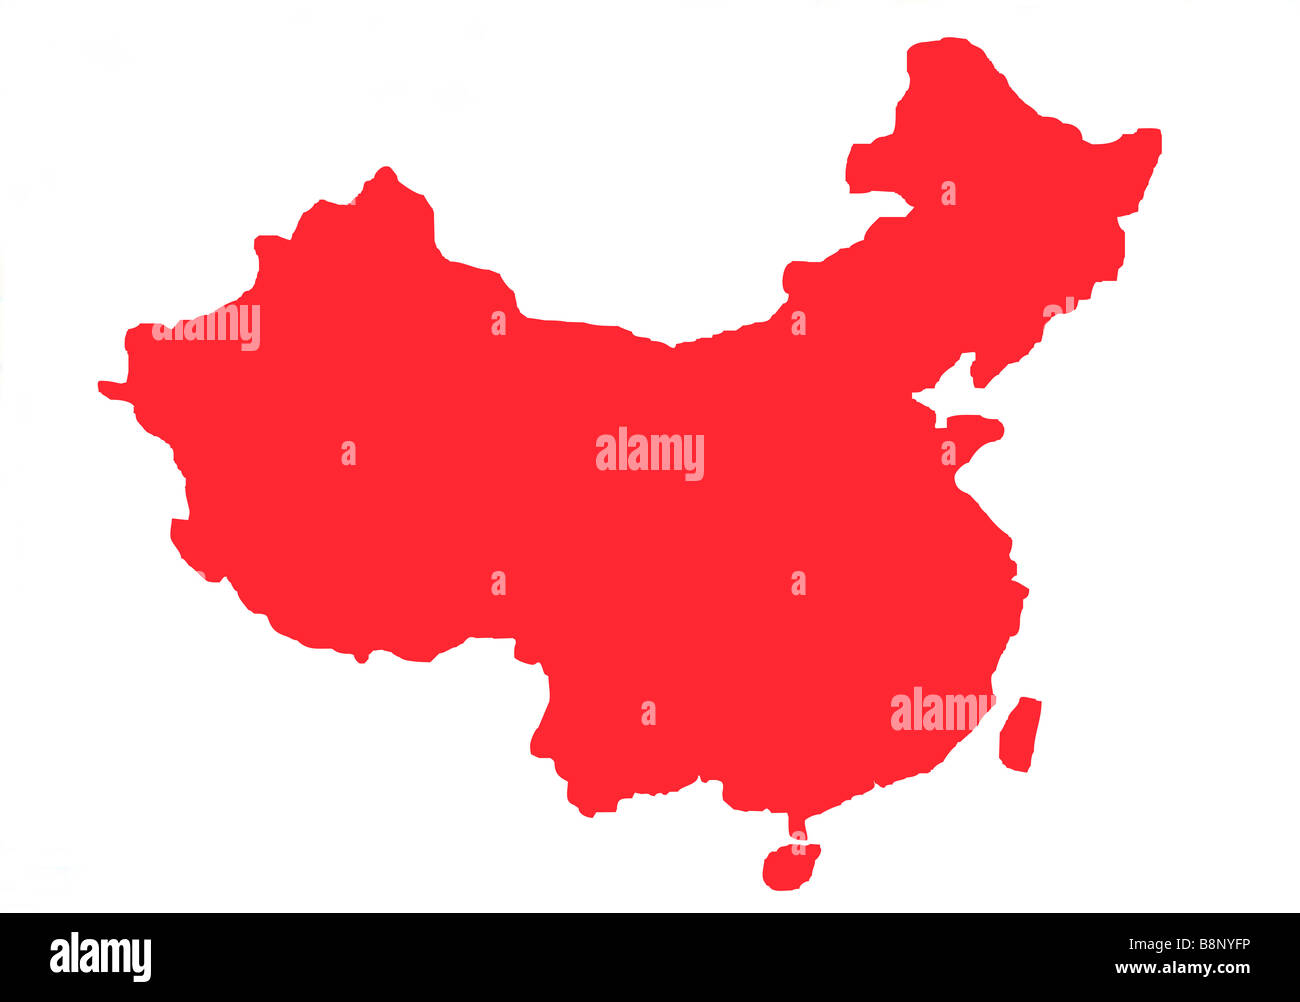 Red outline map of China isolated on white background Stock Photo